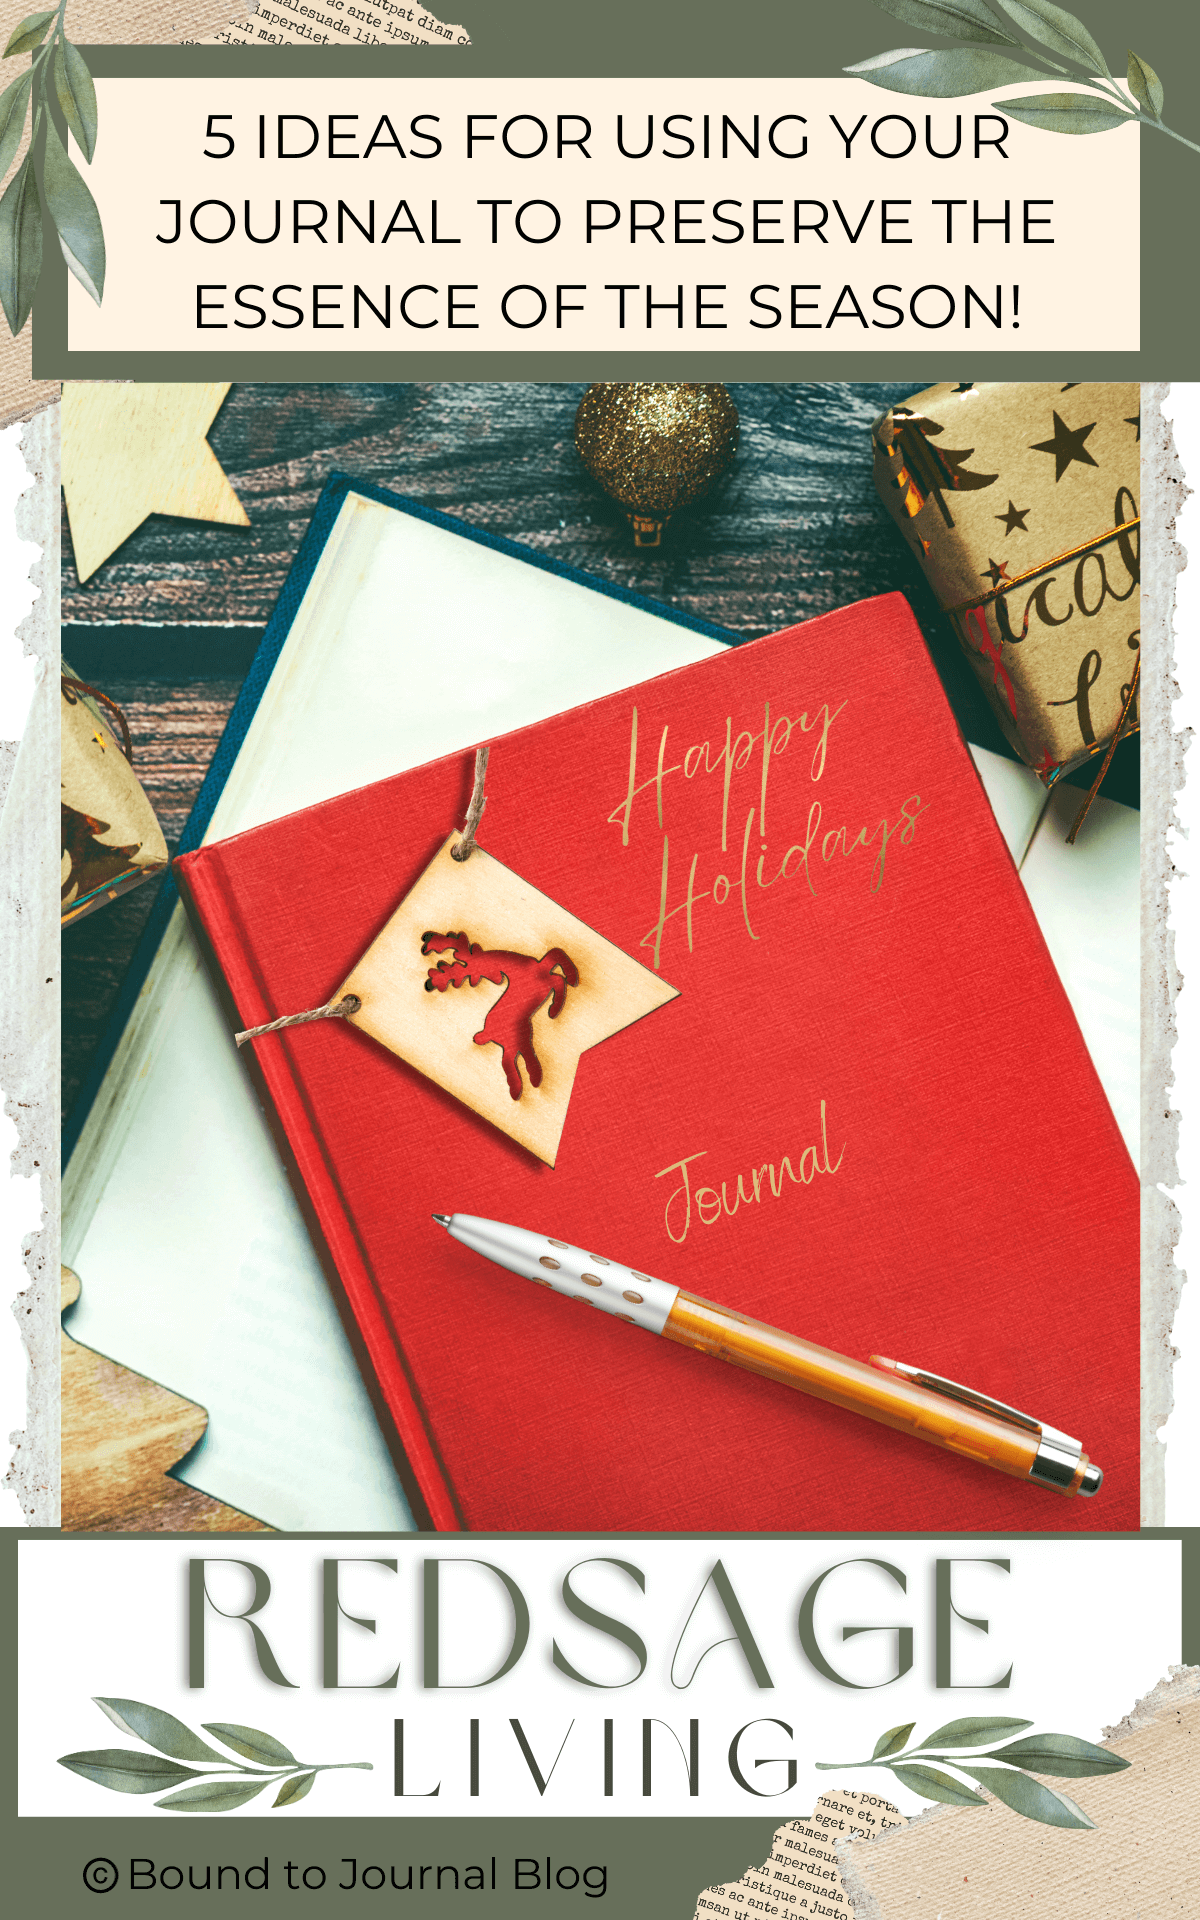 Red journal Happy Holidays next to a wrapped box for post titled 5 ideas for Using your Journal to preserve the essence of the season! v